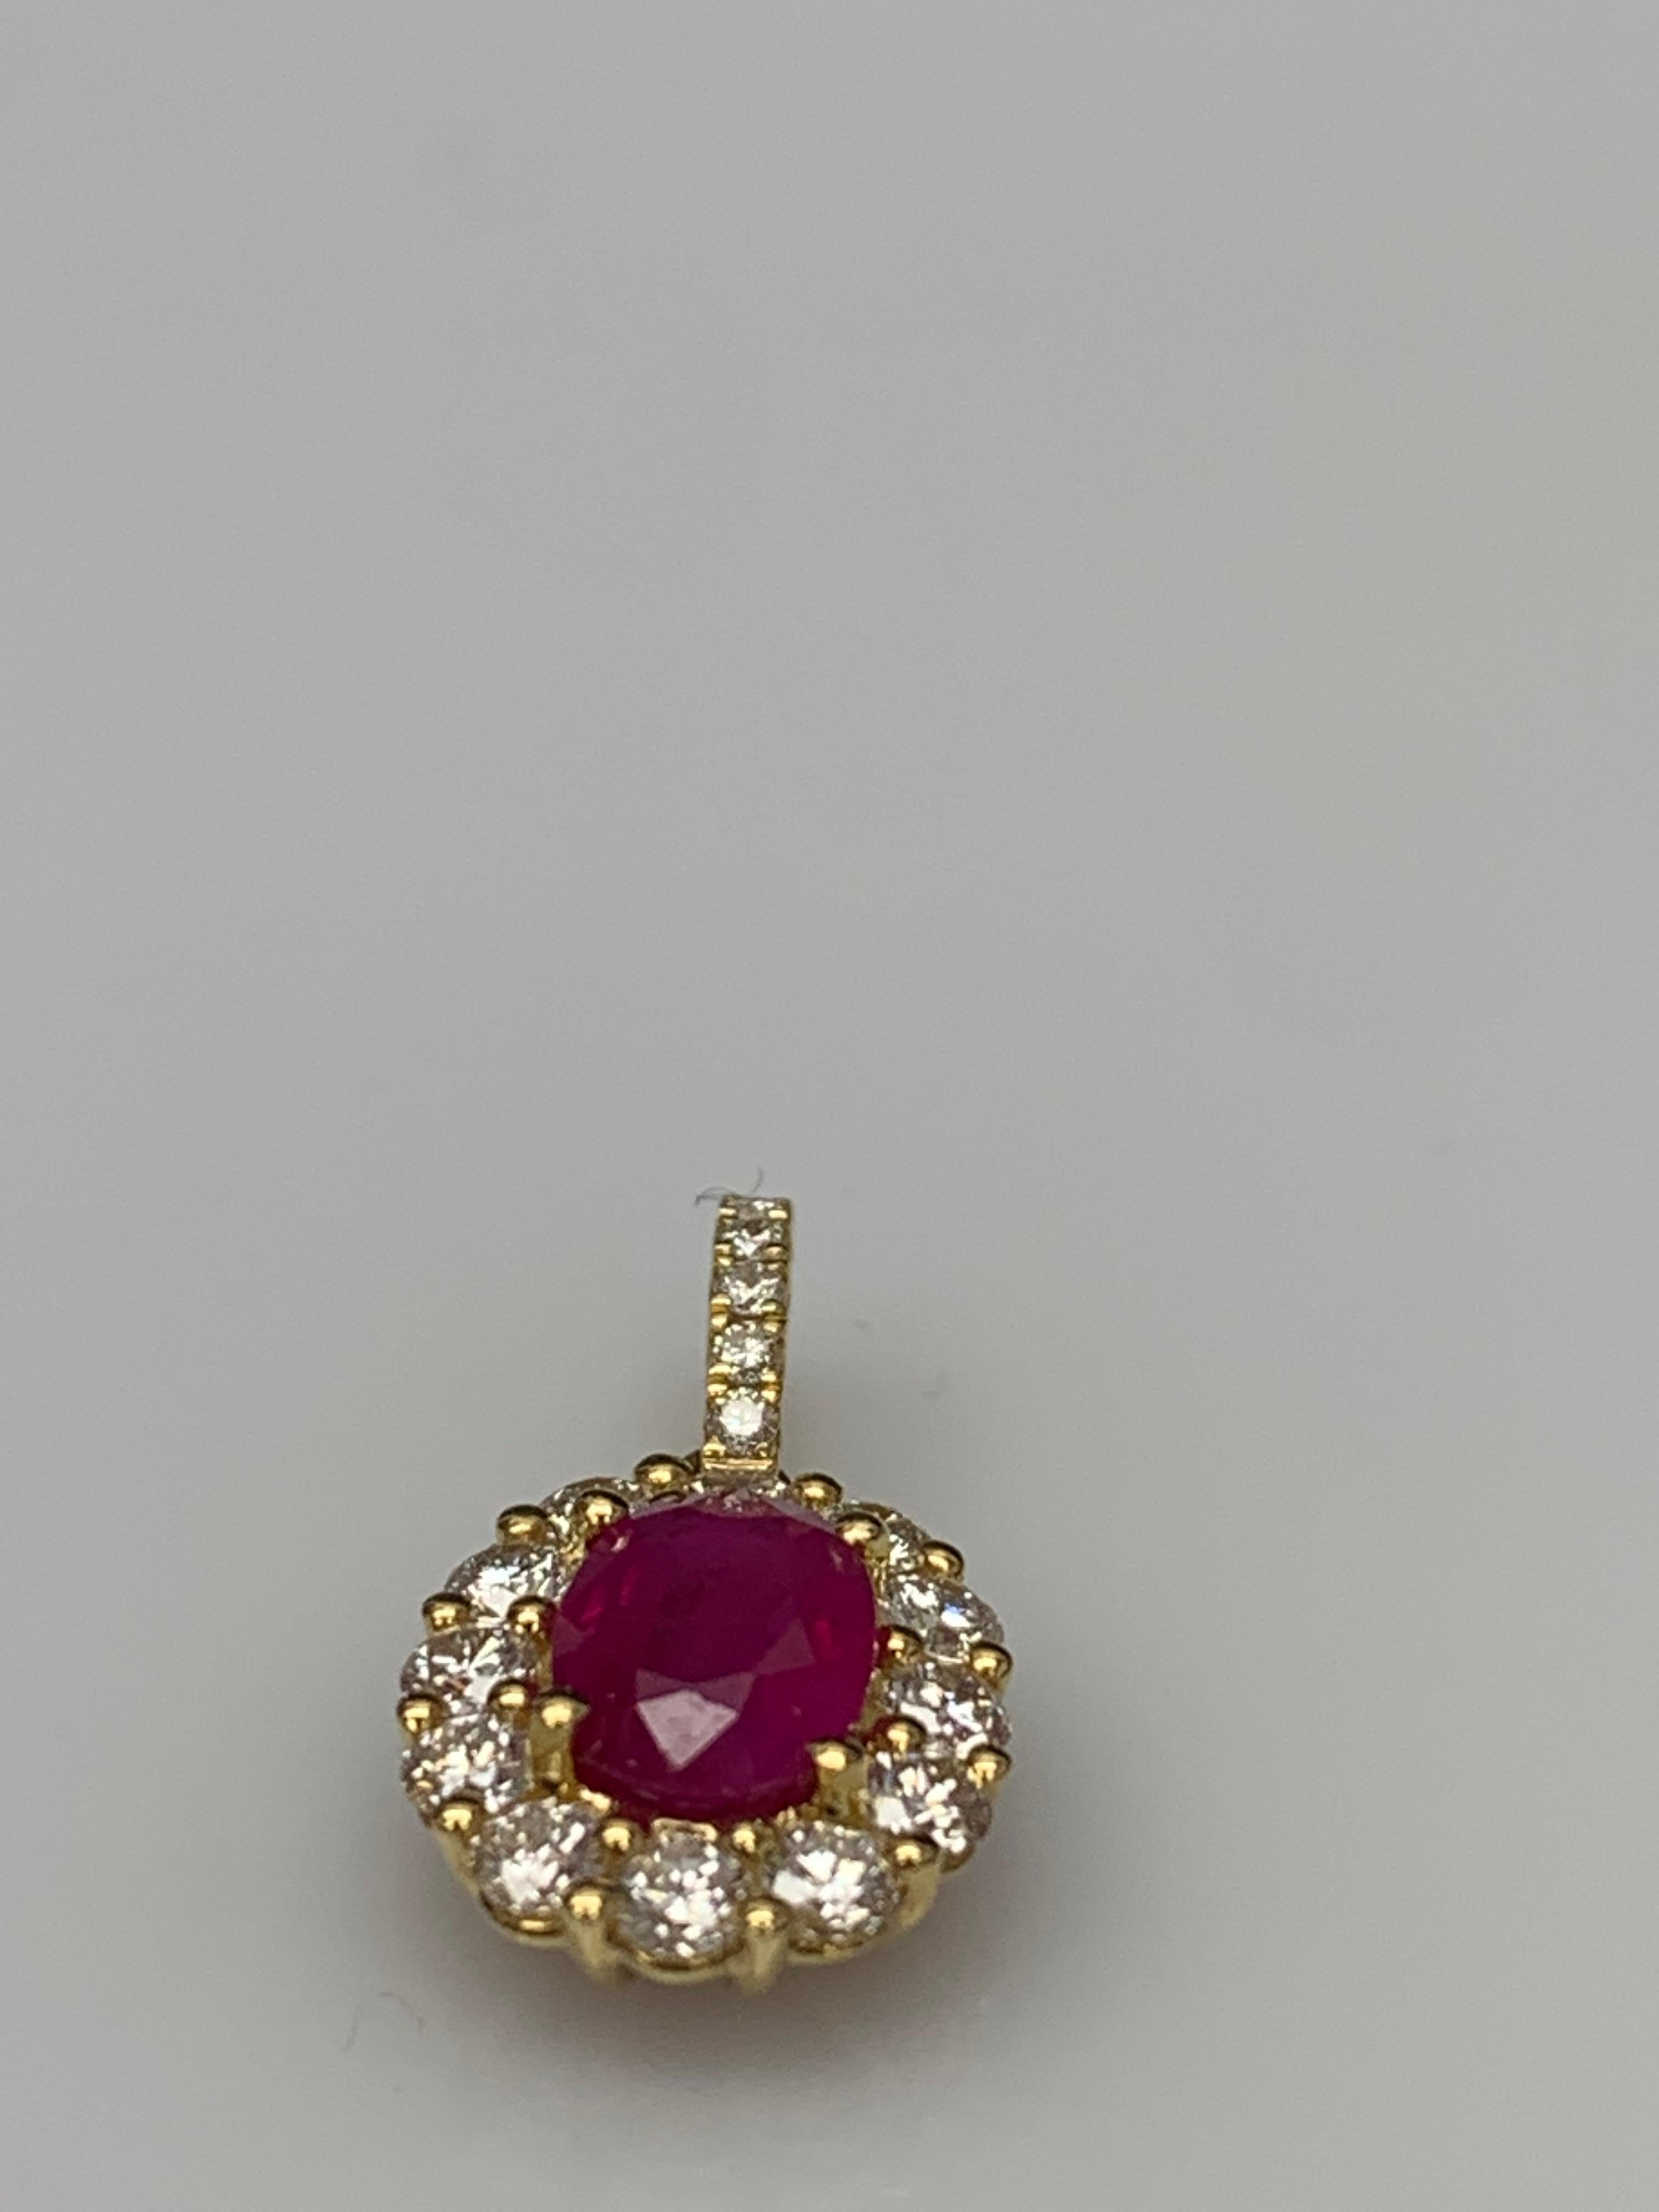 1.00 Carat Oval Cut Ruby and Diamond Halo Pendant Necklace in 18K Yellow Gold For Sale 2